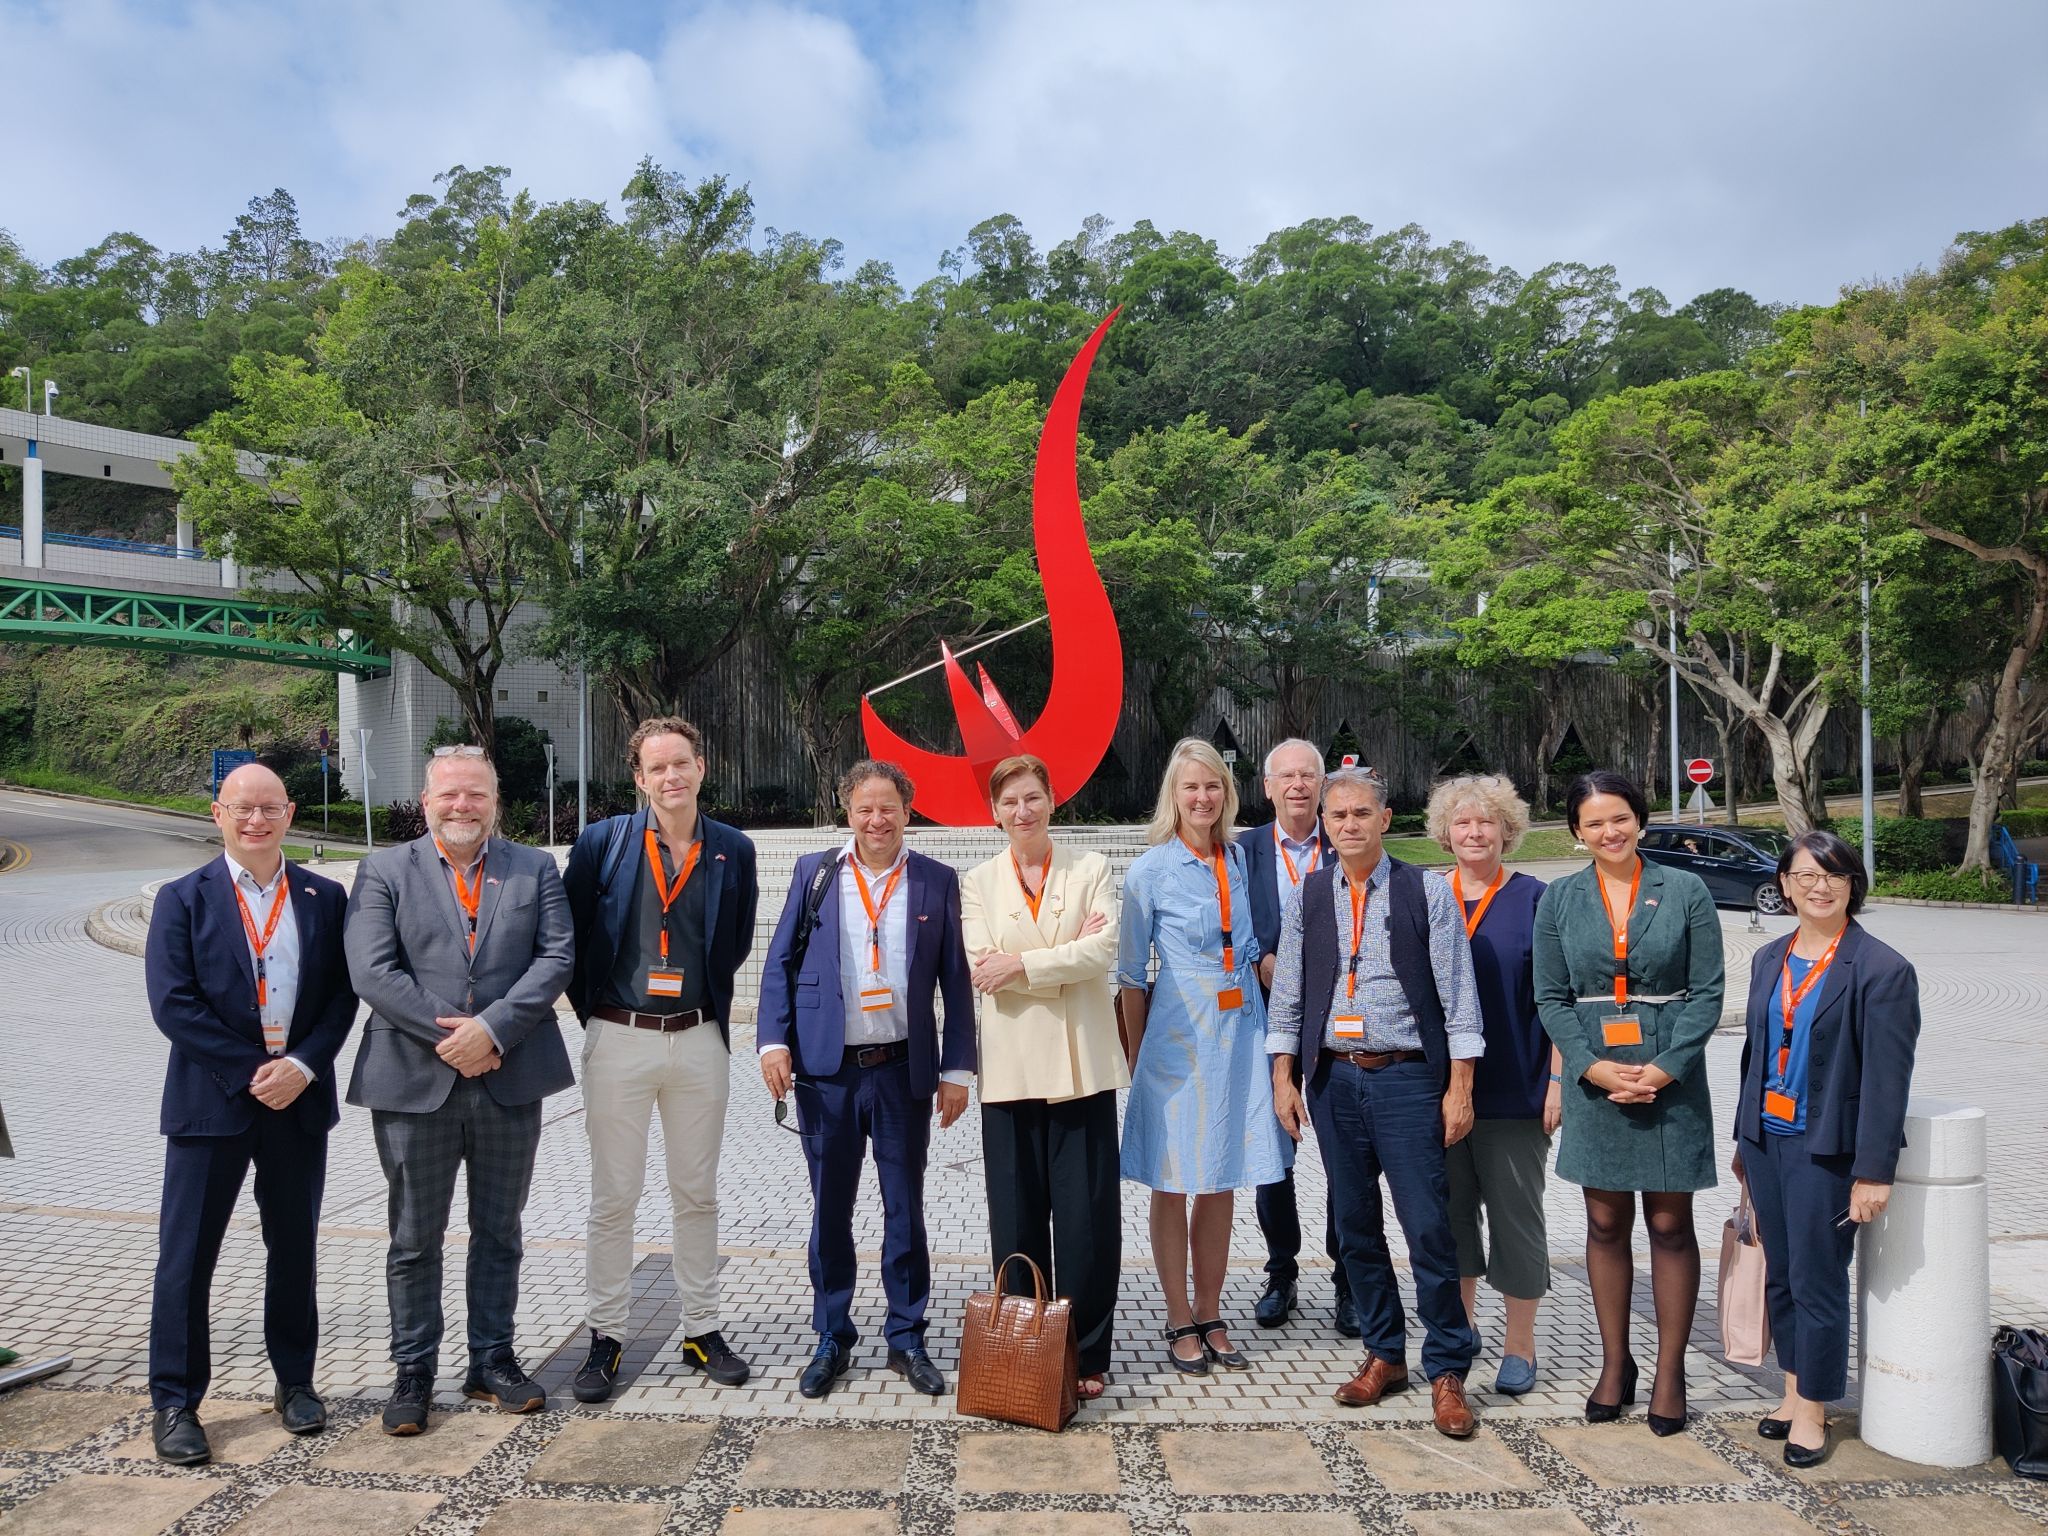 Delegation from The Netherlands, led by the Ministry of Health, Welfare and Sport visited HKUST in October.